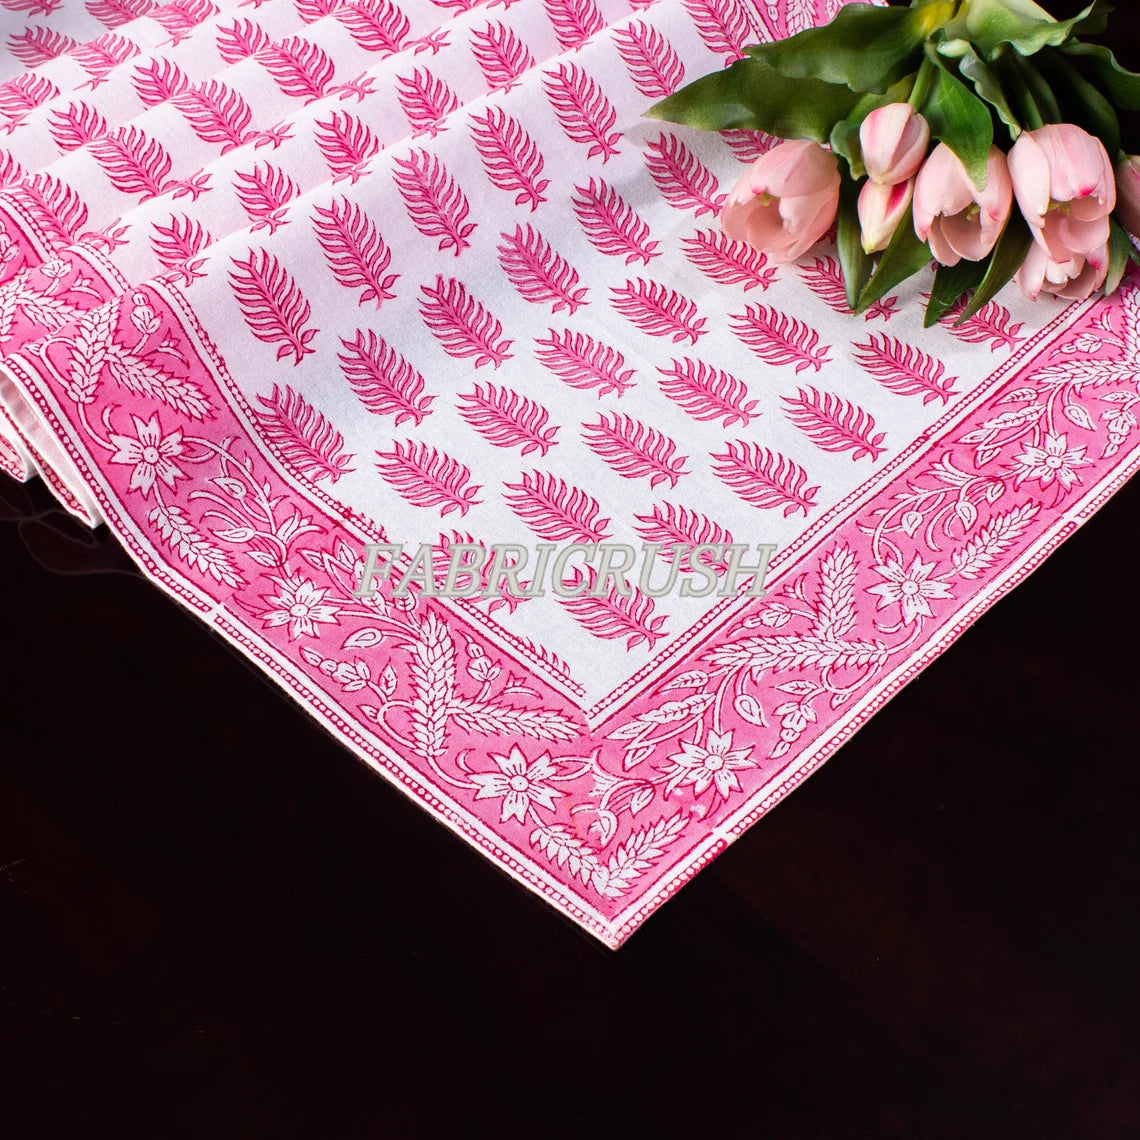 Fabricrush Taffy Pink Leaves Print Indian Hand Block Floral Printed Cotton Cloth Table Runner Wedding Events Home Decor Farmhouse Console Birthday Gift